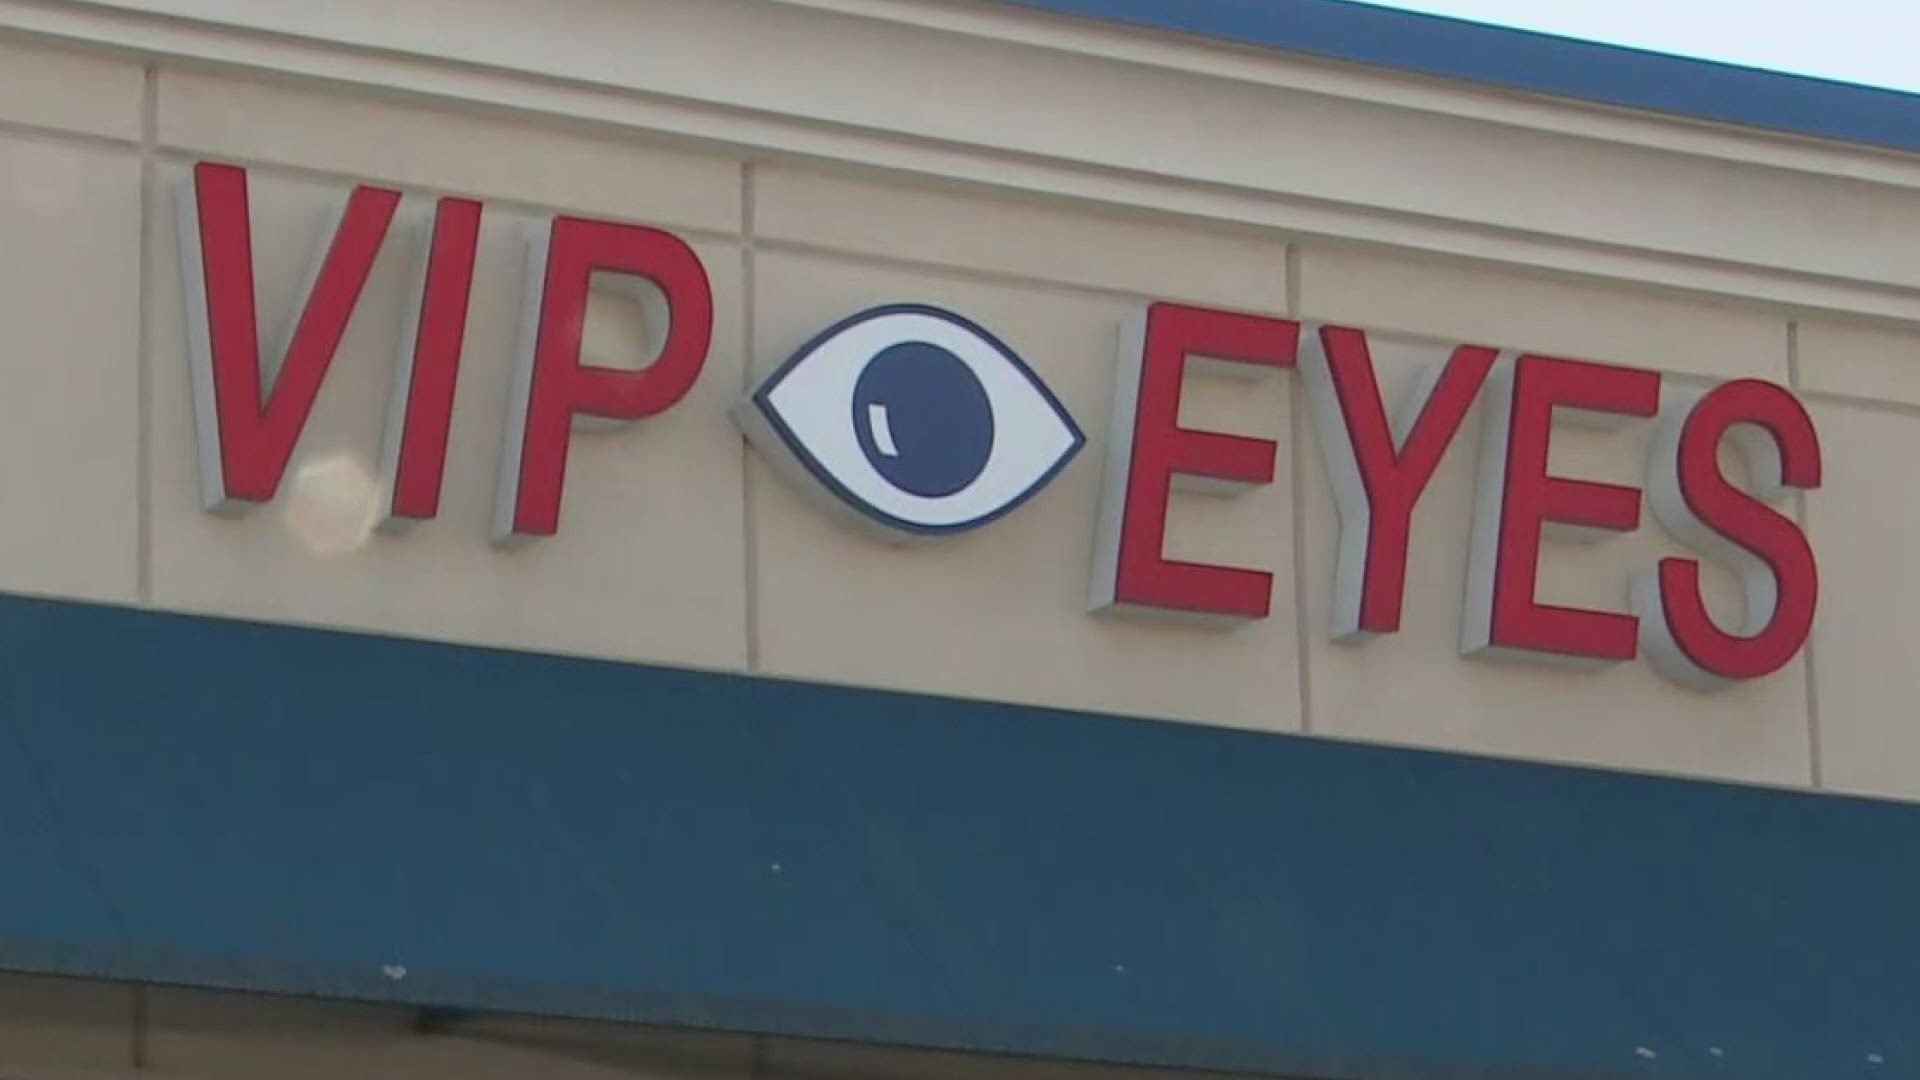 VIP Eyes in Portland, like most other small businesses during the coronavirus, has had to get creative to keep up and running.